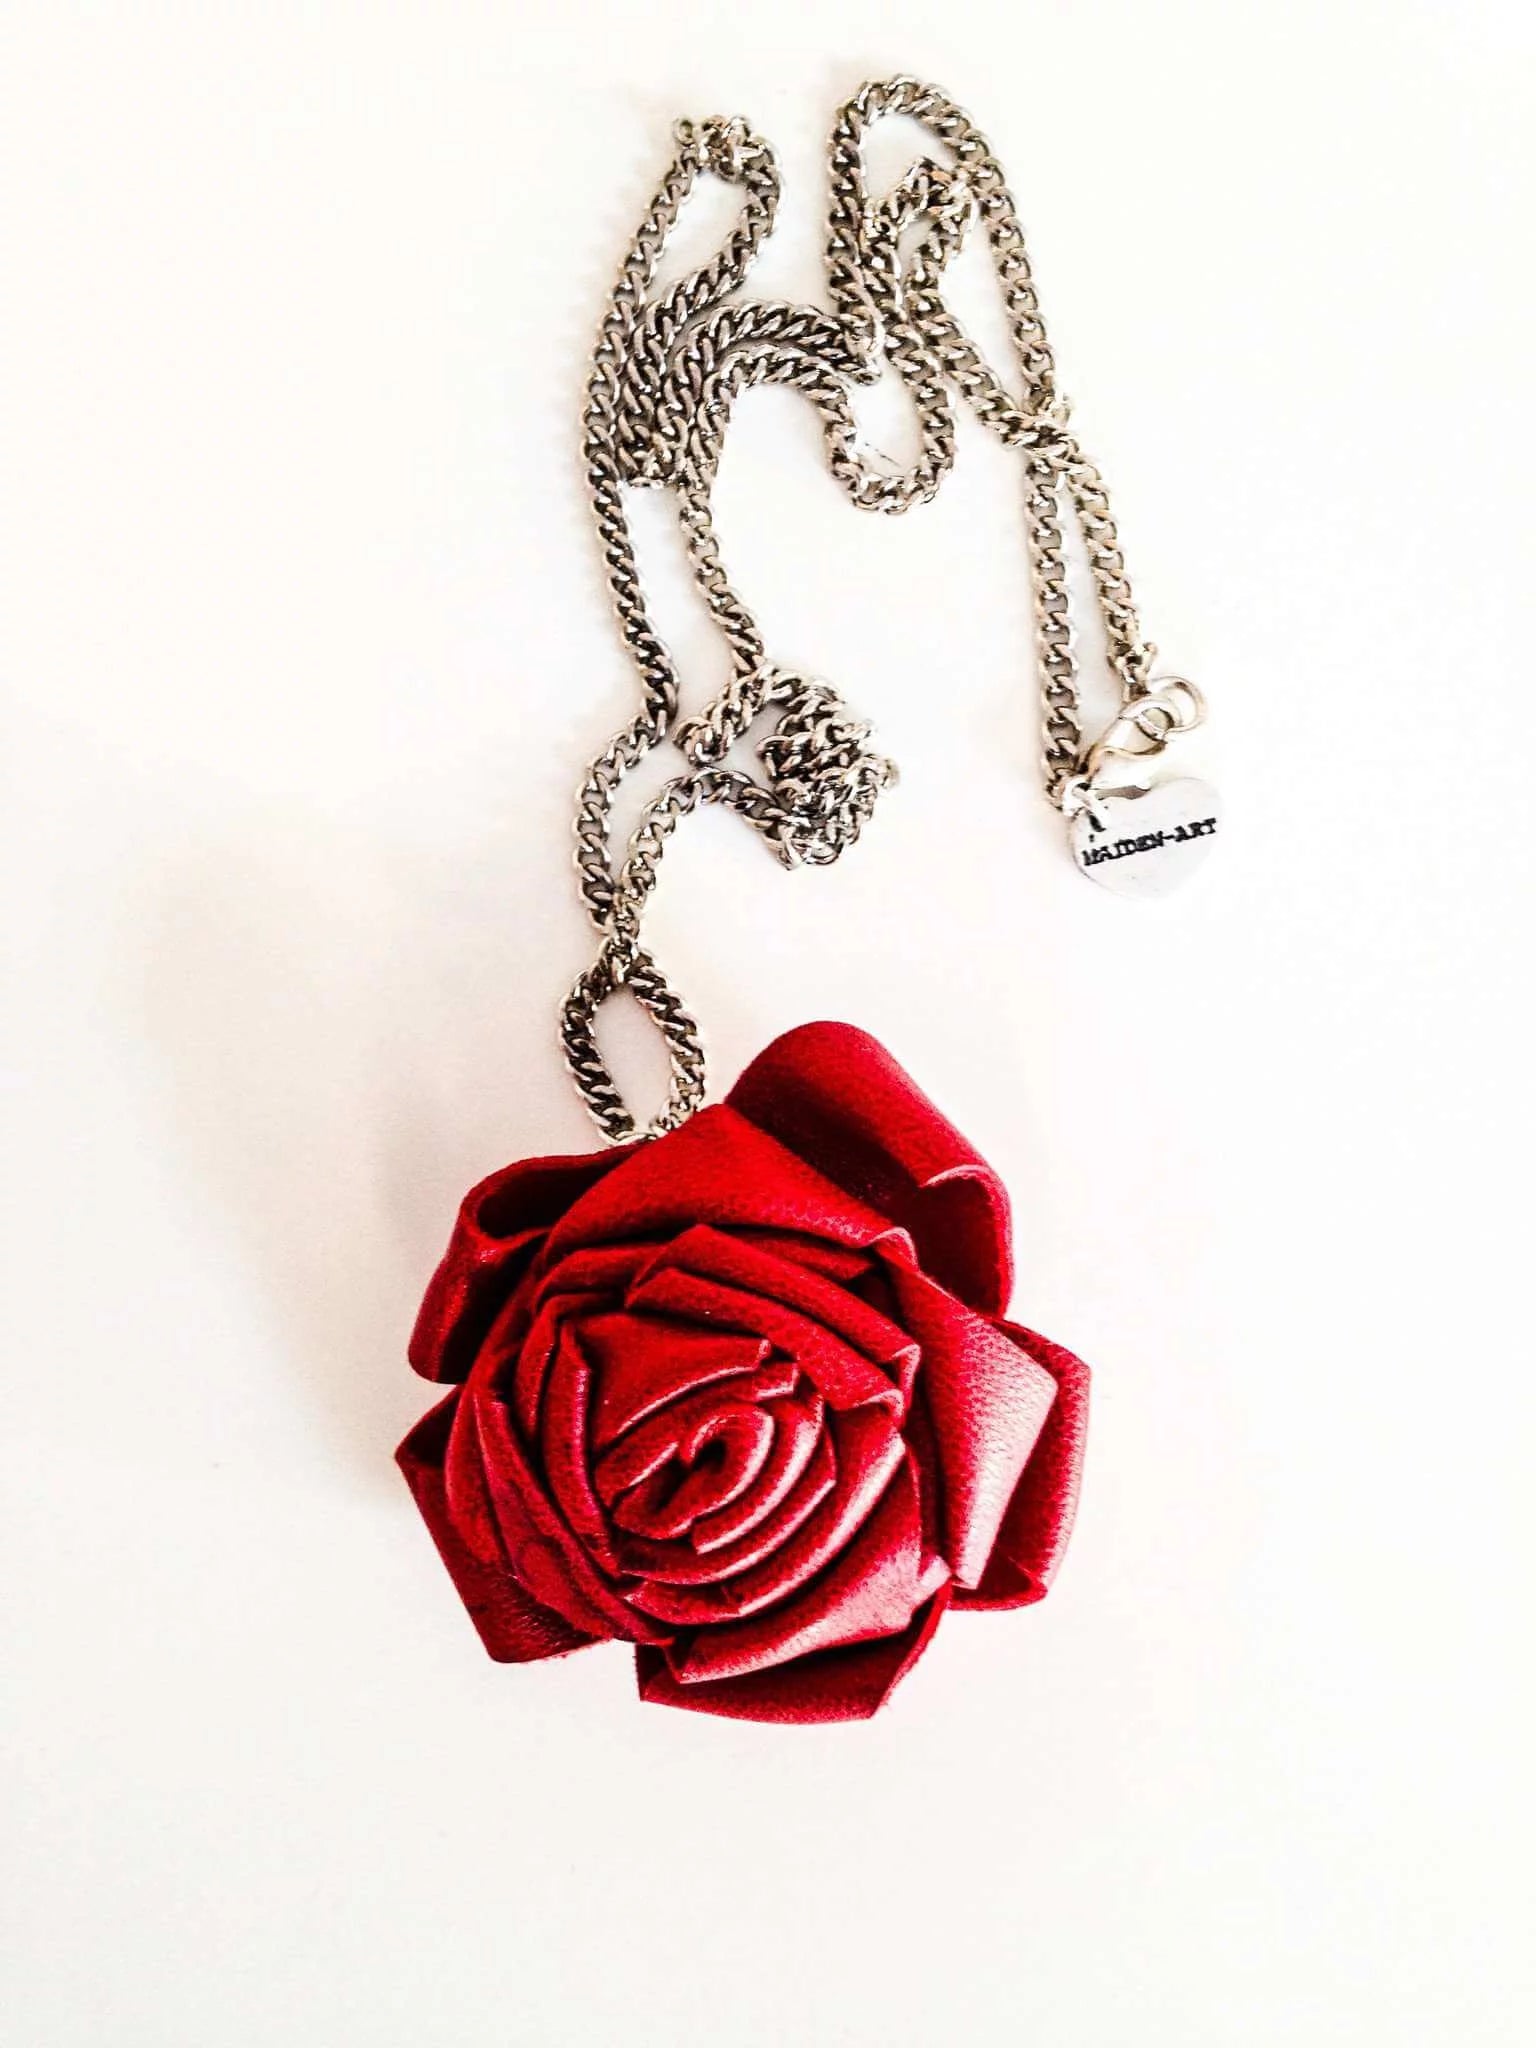 True Leather Red Rose Necklace - Maiden-Art